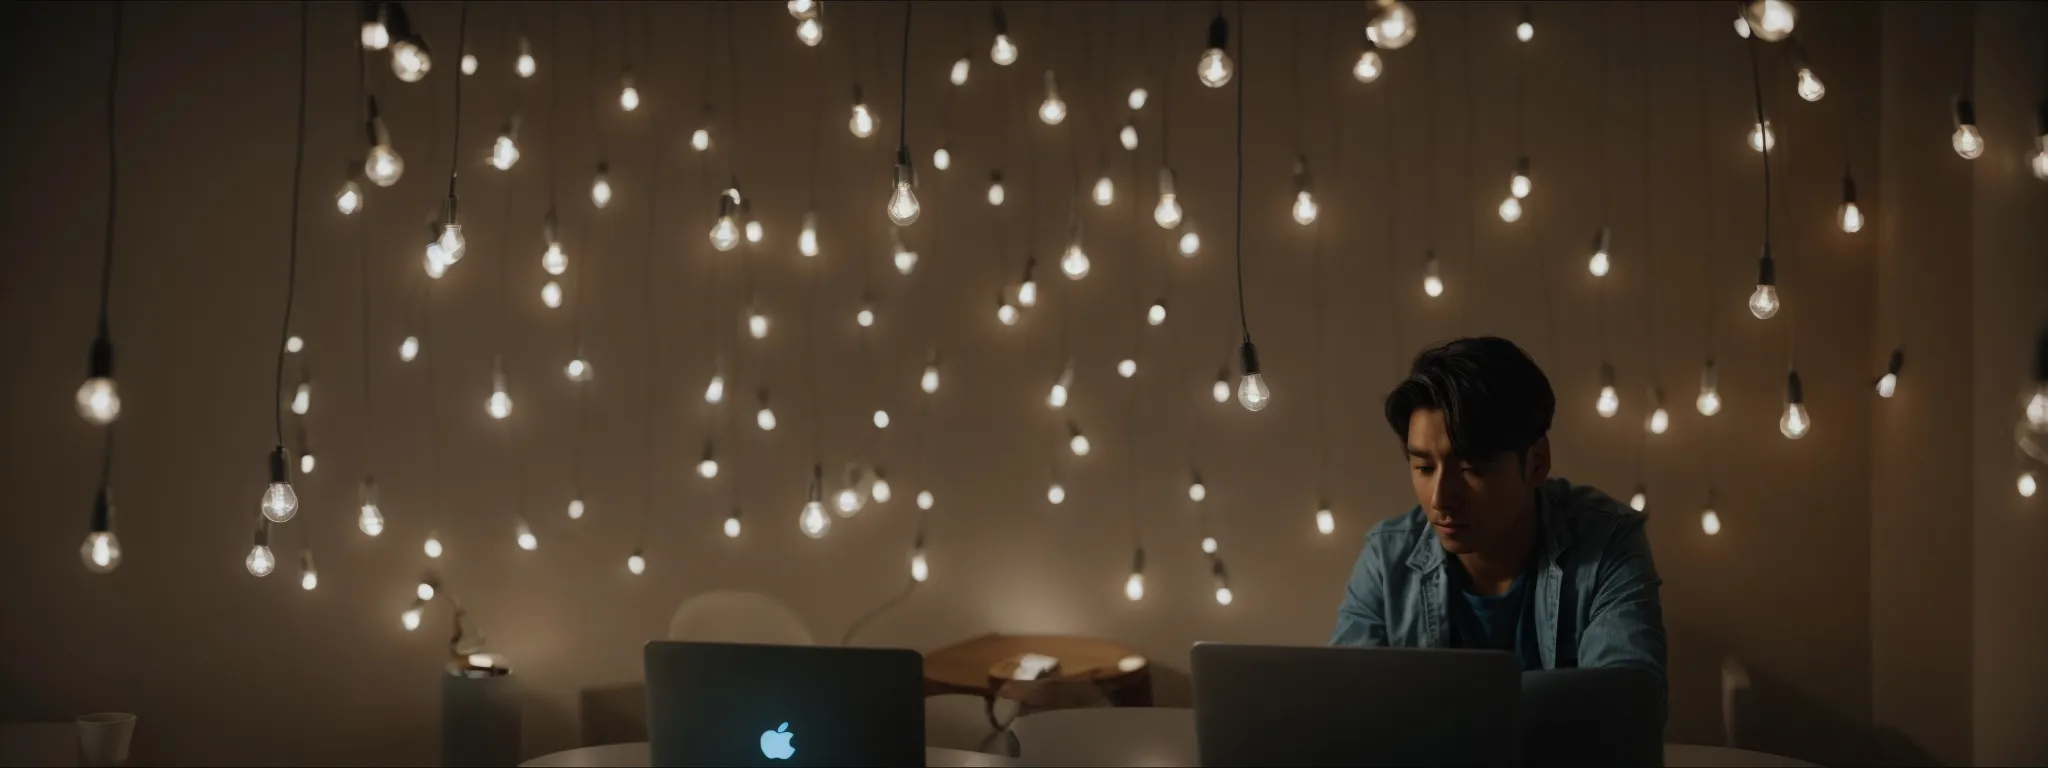 a person sitting in front of a laptop, surrounded by floating light bulbs symbolizing innovative ideas for keywords.